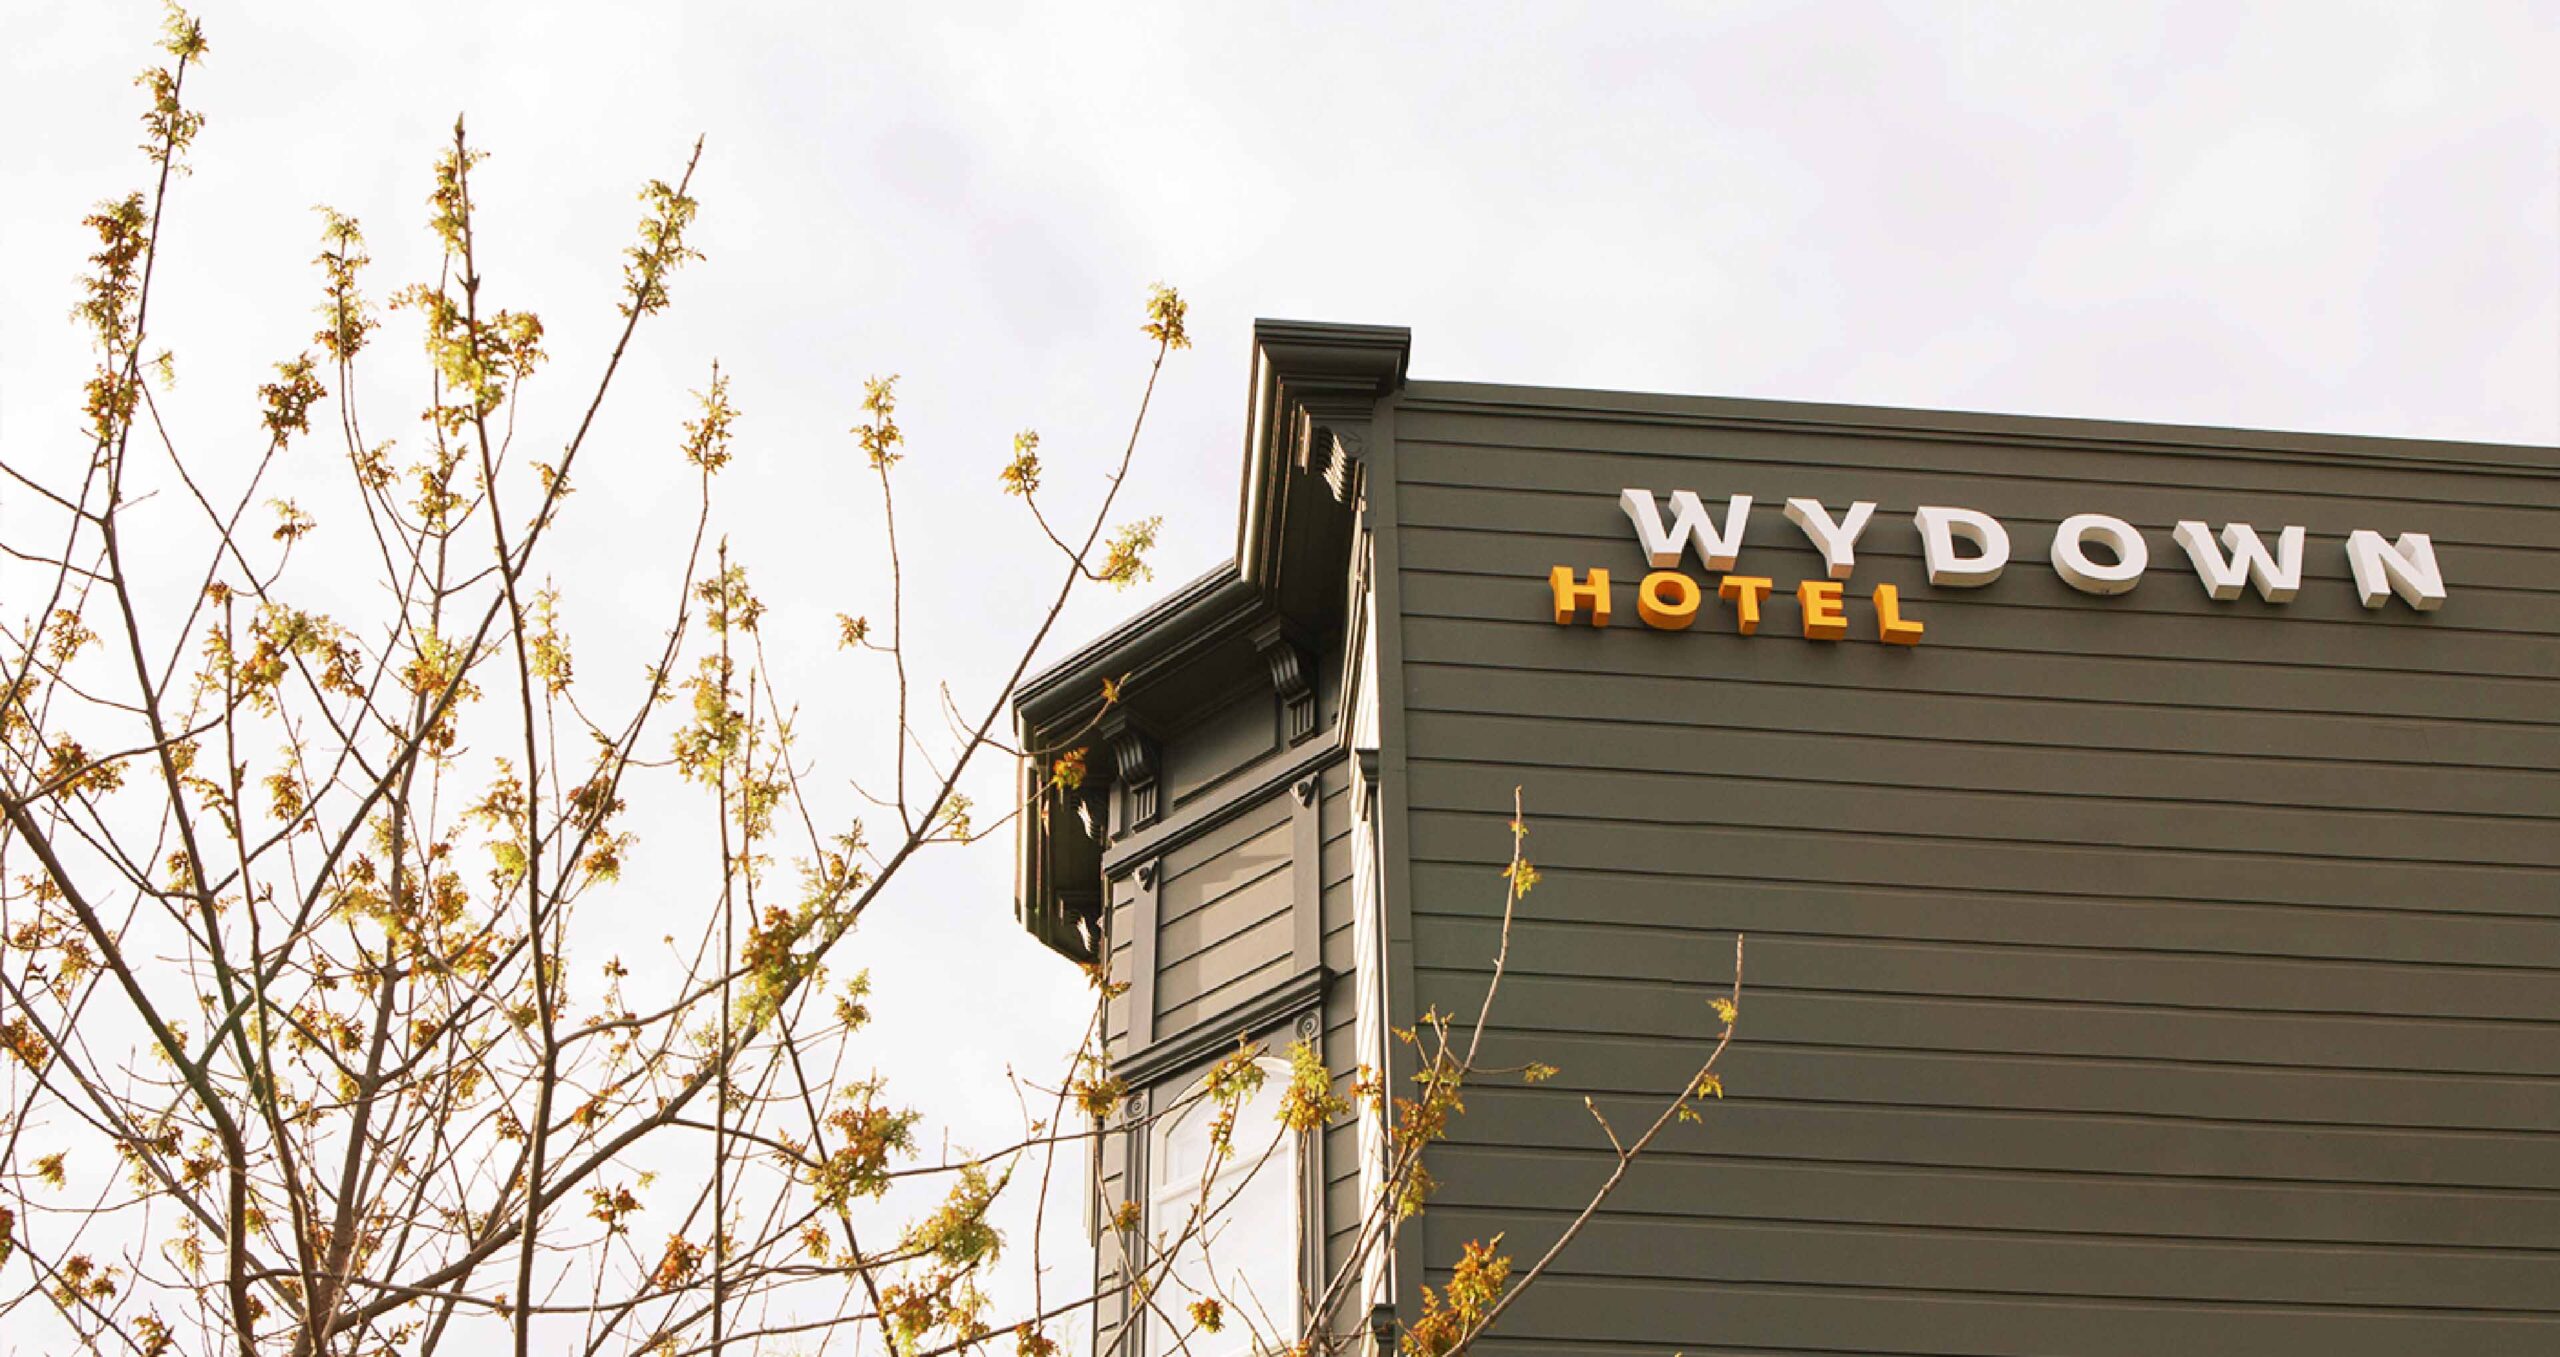 Exterior signage of Wydown Hotel